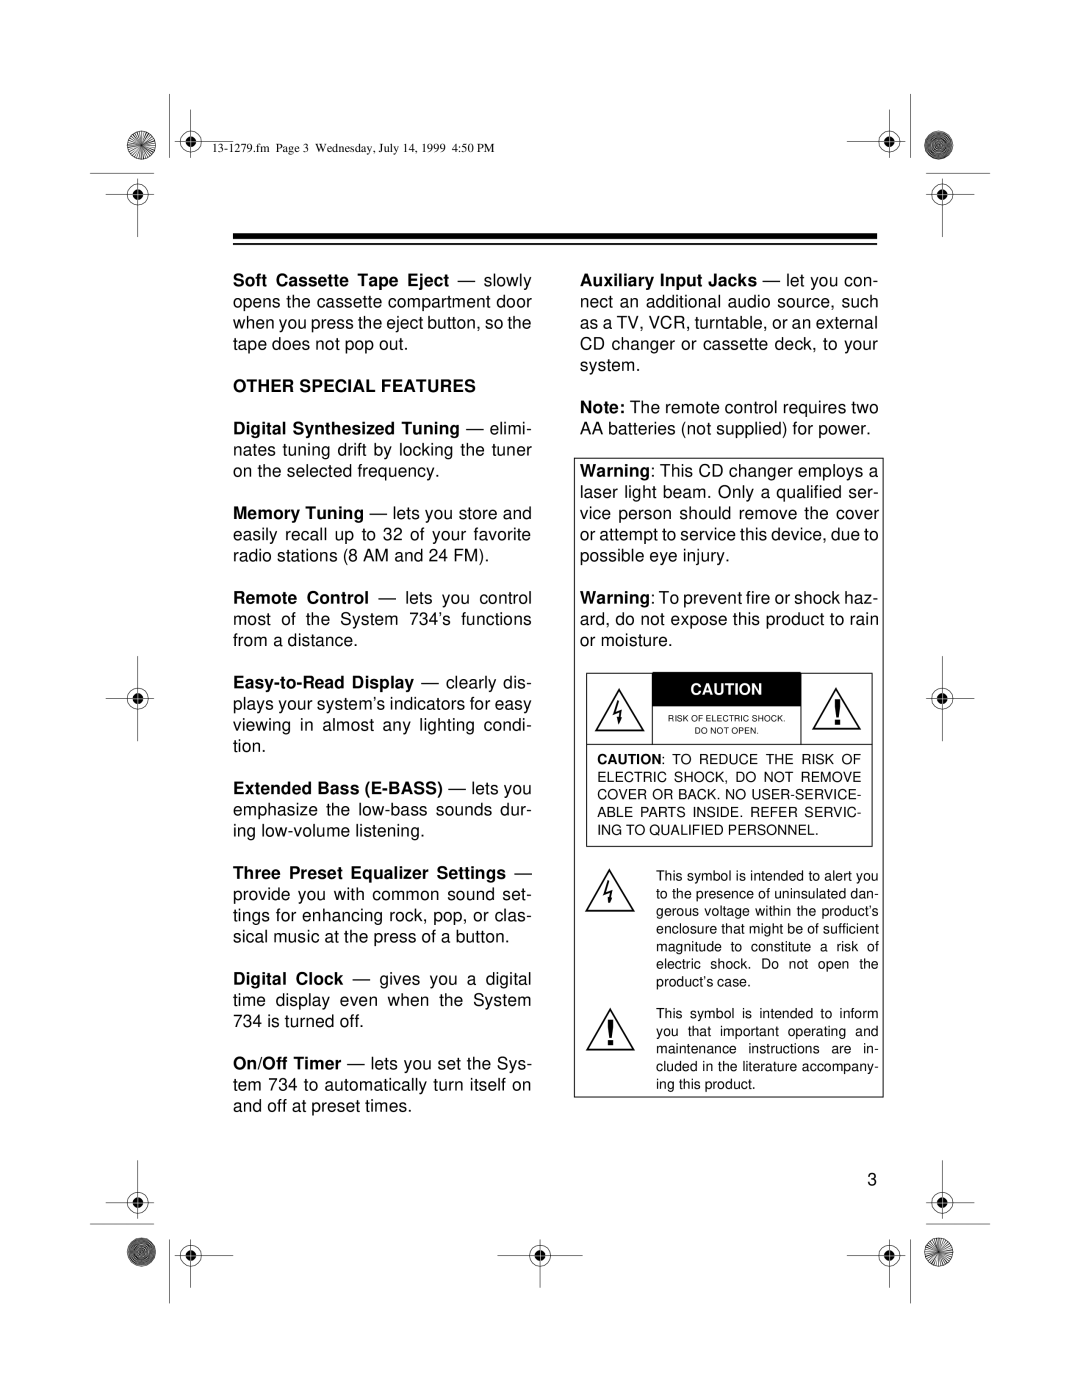 Optimus SYSTEM 734 owner manual Other Special Features 